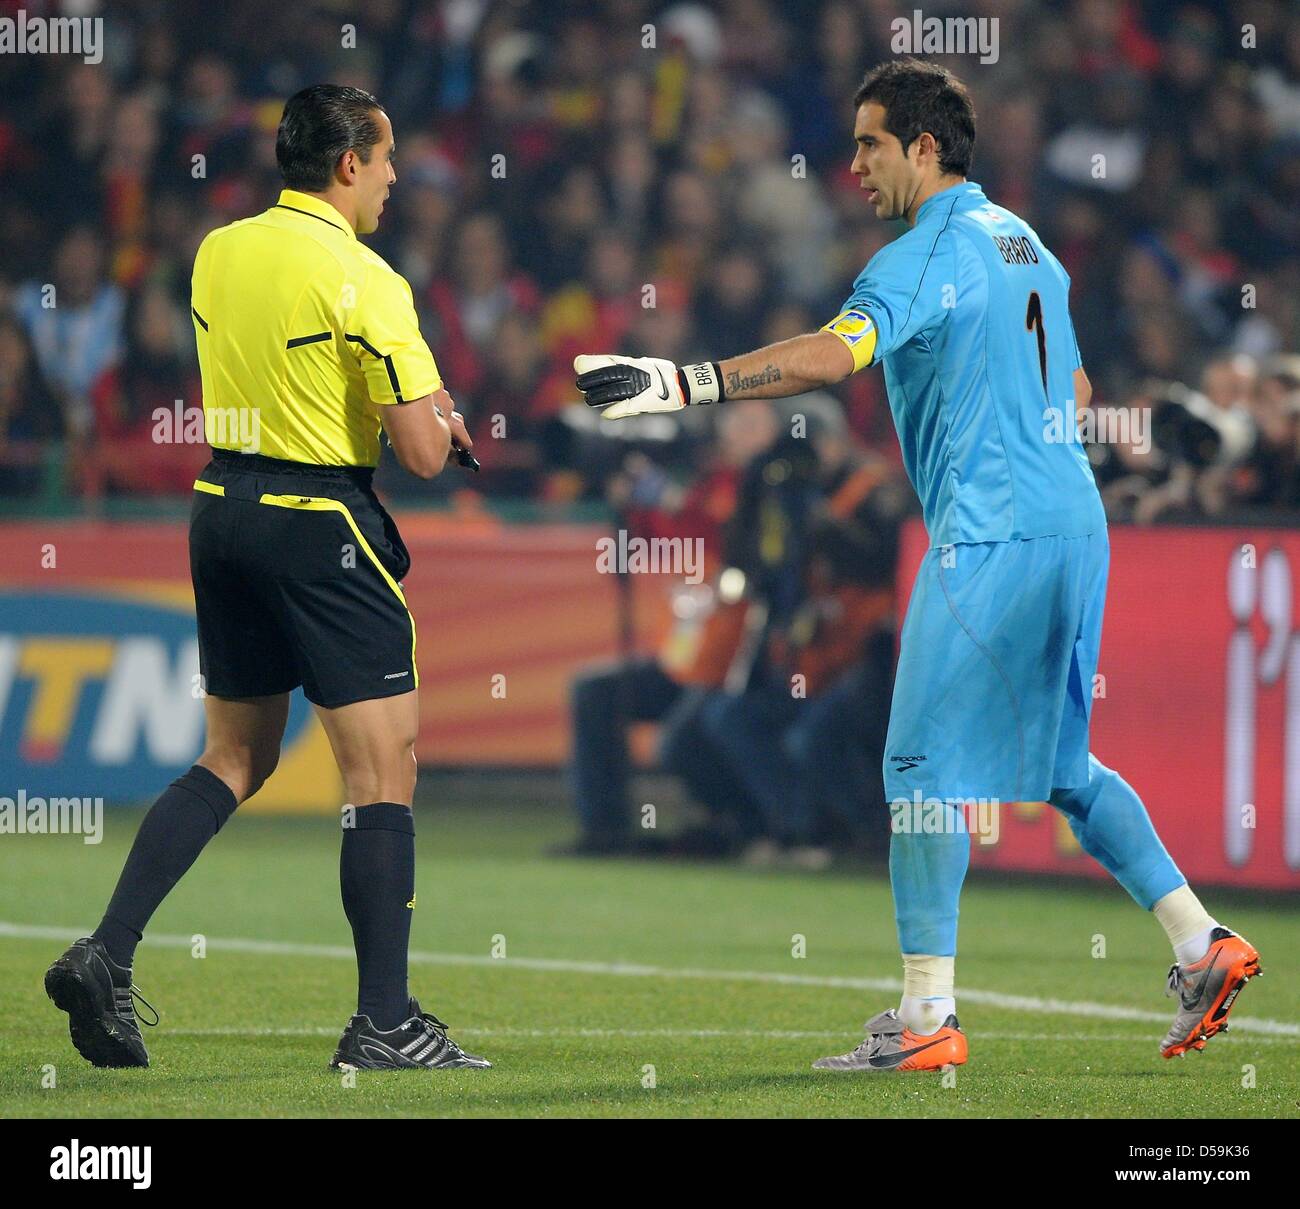 Chile's goalkeeper Claudio Bravo gestures towards Mexican referee Marco Rodriguez during the 2010 FIFA World Cup group H match between Chile and Spain at Loftus Versfeld Stadium in Pretoria, South Africa 25 June 2010. Photo: Marcus Brandt dpa - Please refer to http://dpaq.de/FIFA-WM2010-TC Stock Photo